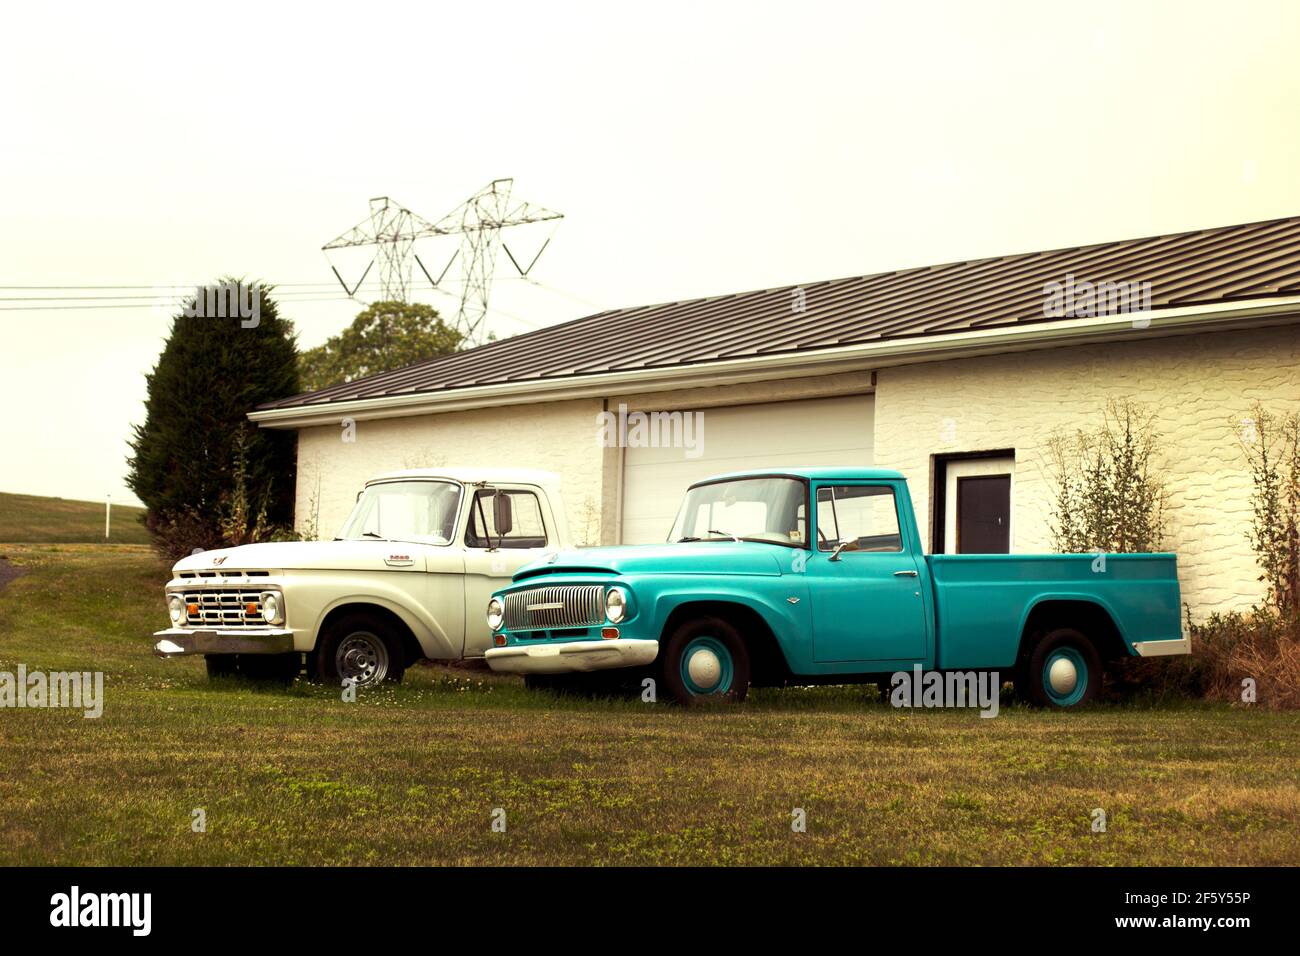 A pair of mid century old ford trucks in turquoise blue and white sit facing left in the grass Stock Photo